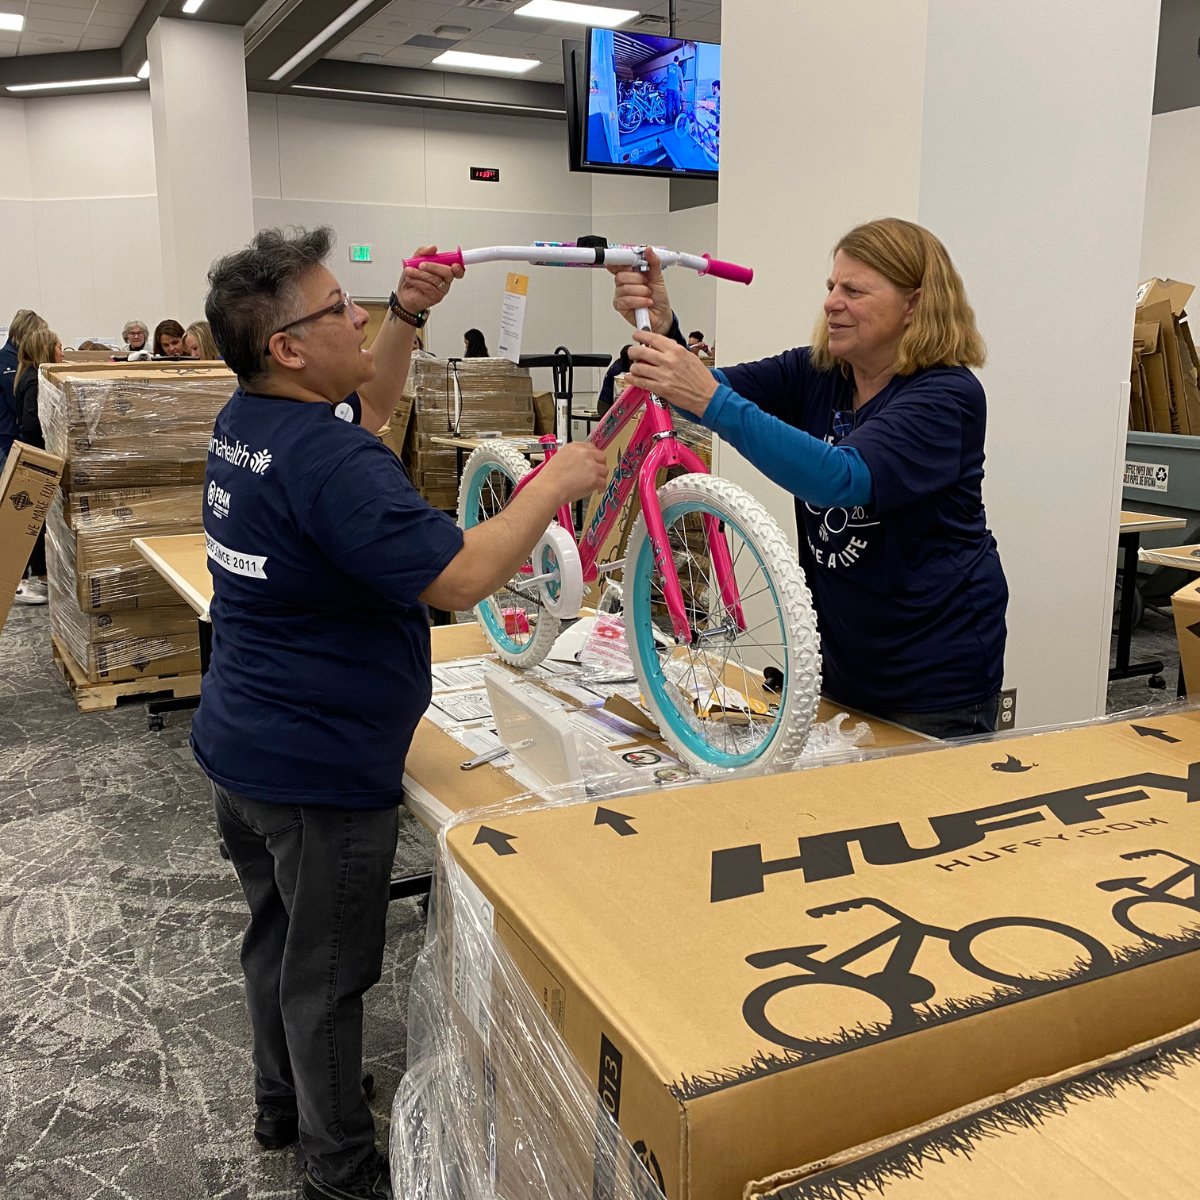 It was exciting to see so many @AllinaHealth past and present team members such as @PennyWheelerMD and @MDHCommMalcolm volunteering with @FreeBikes4Kidz. Thank you to all those who donated their time to such a great cause! #fb4kMN #AllTogetherBetter #CareersWithPurpose